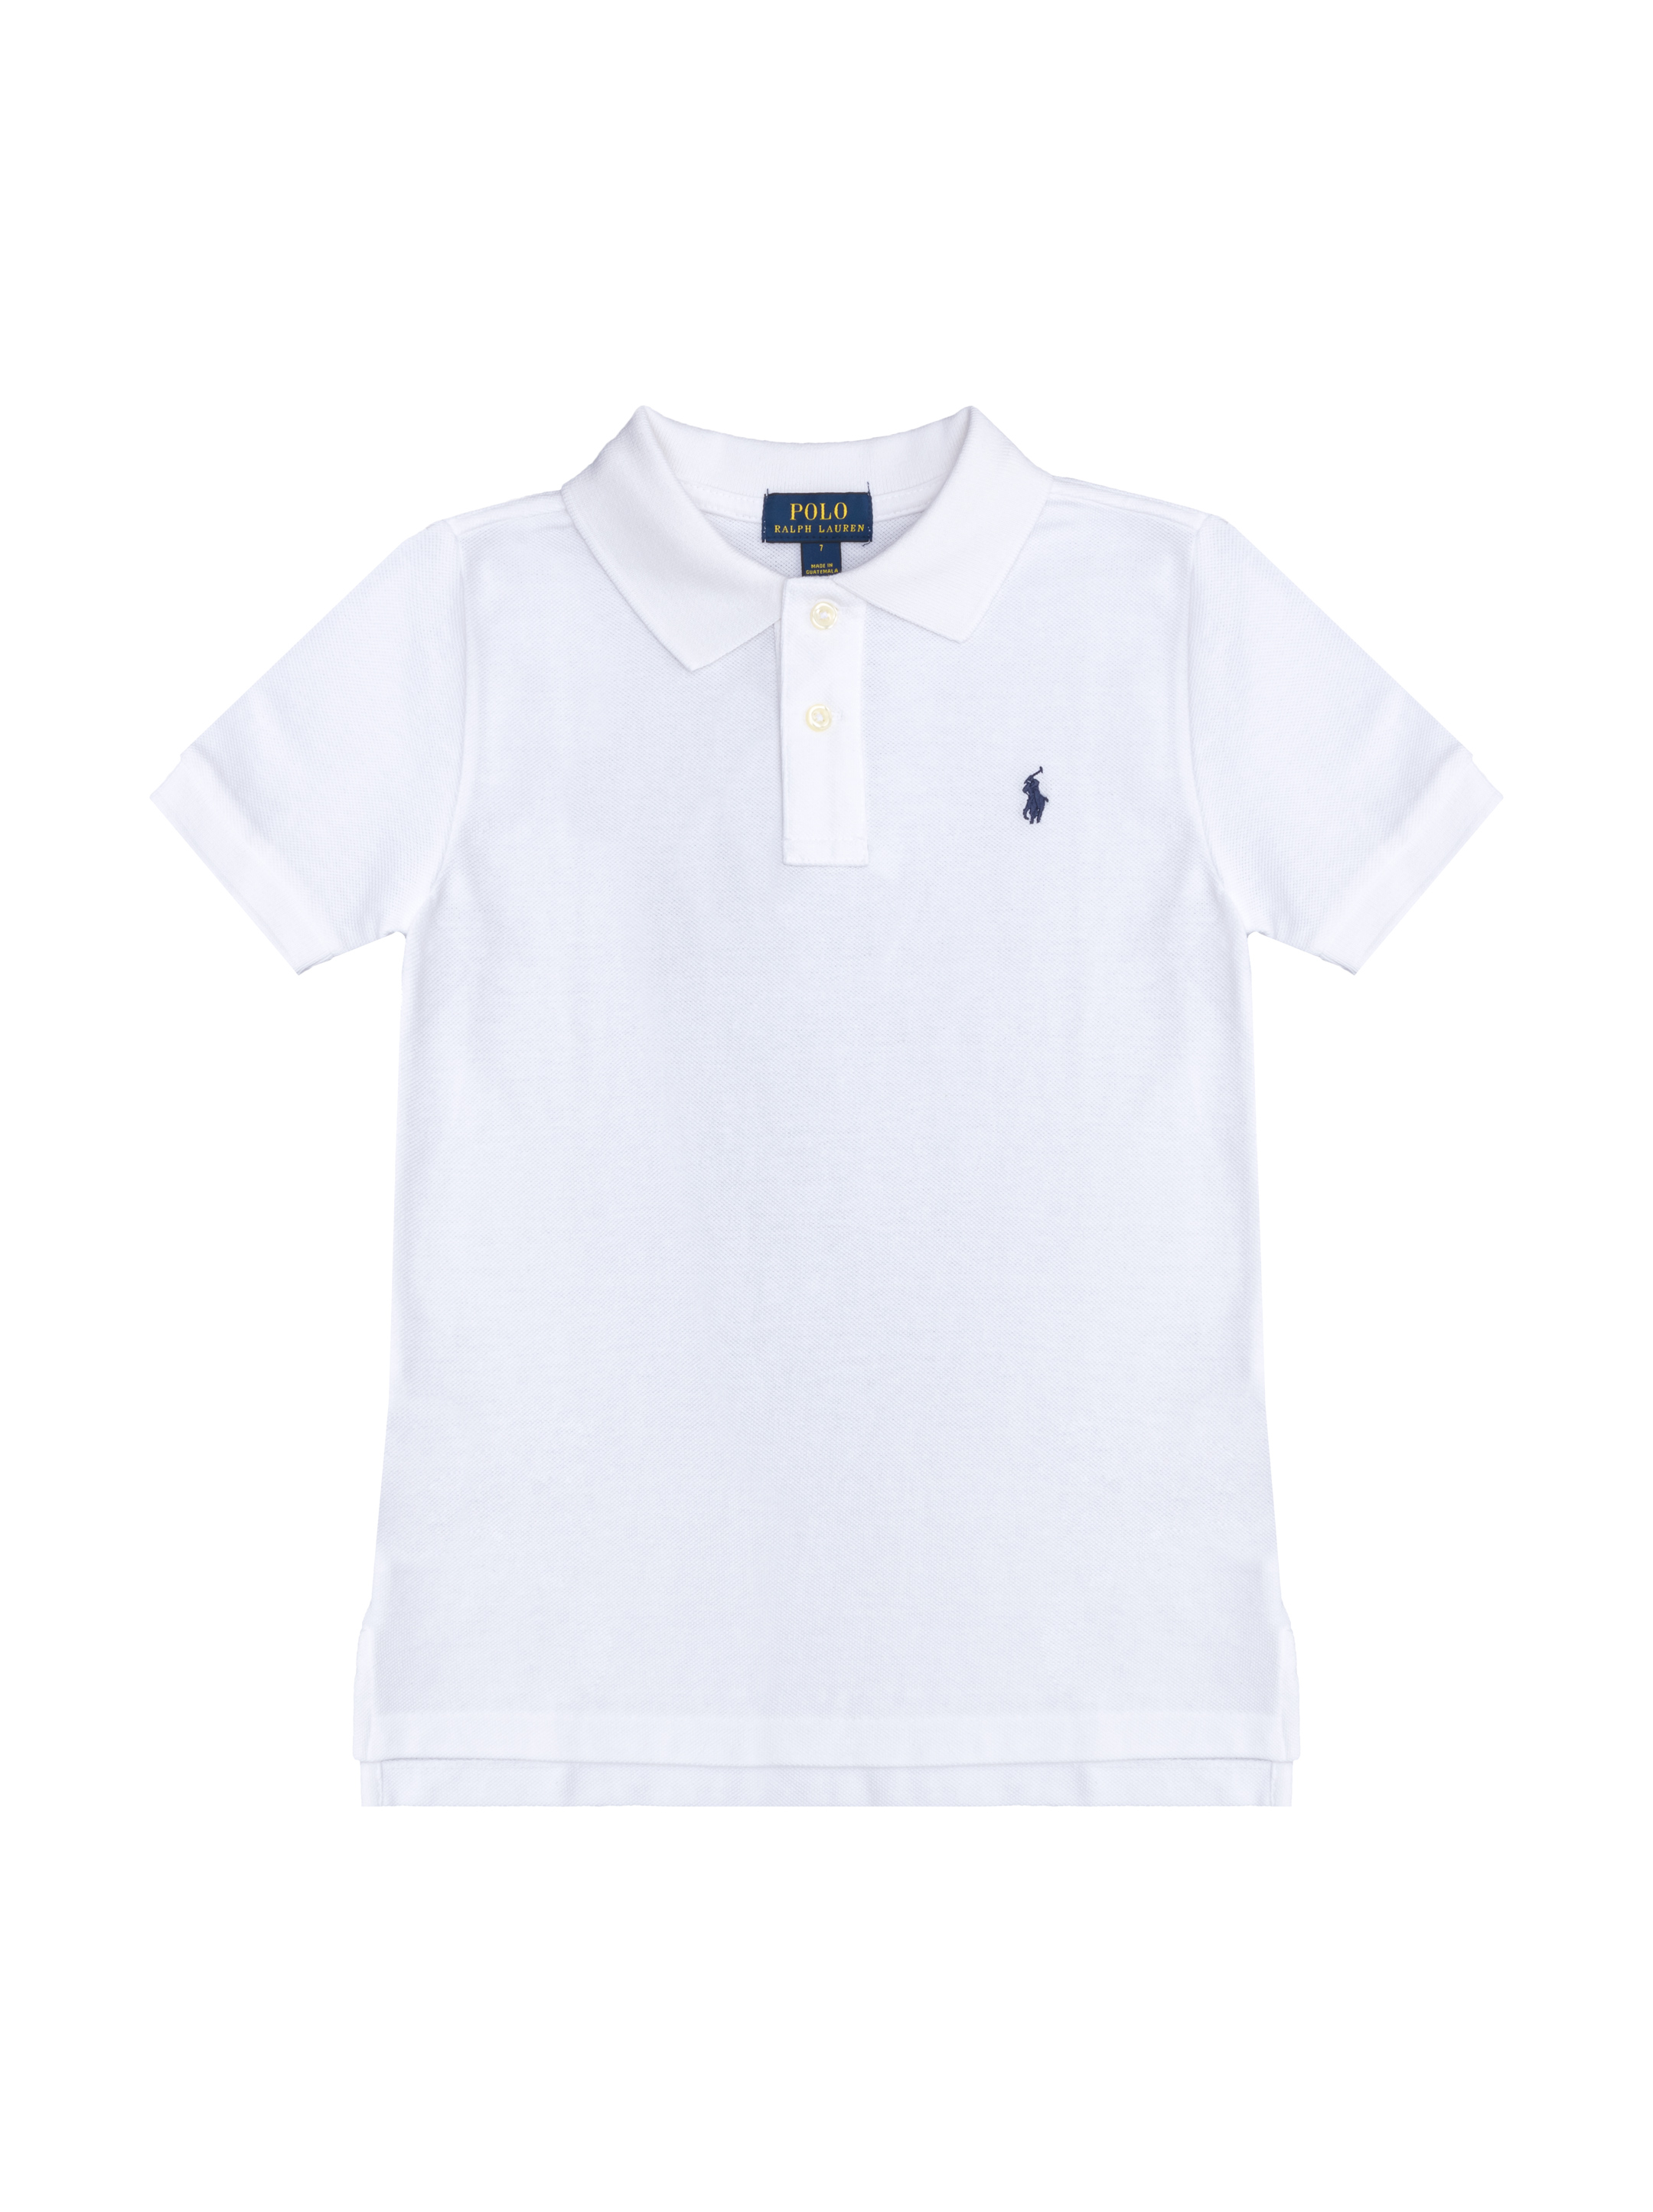 Ralph Lauren kids' Cotton polo with logo - buy for 50700 KZT in the  official Viled online store, art. 